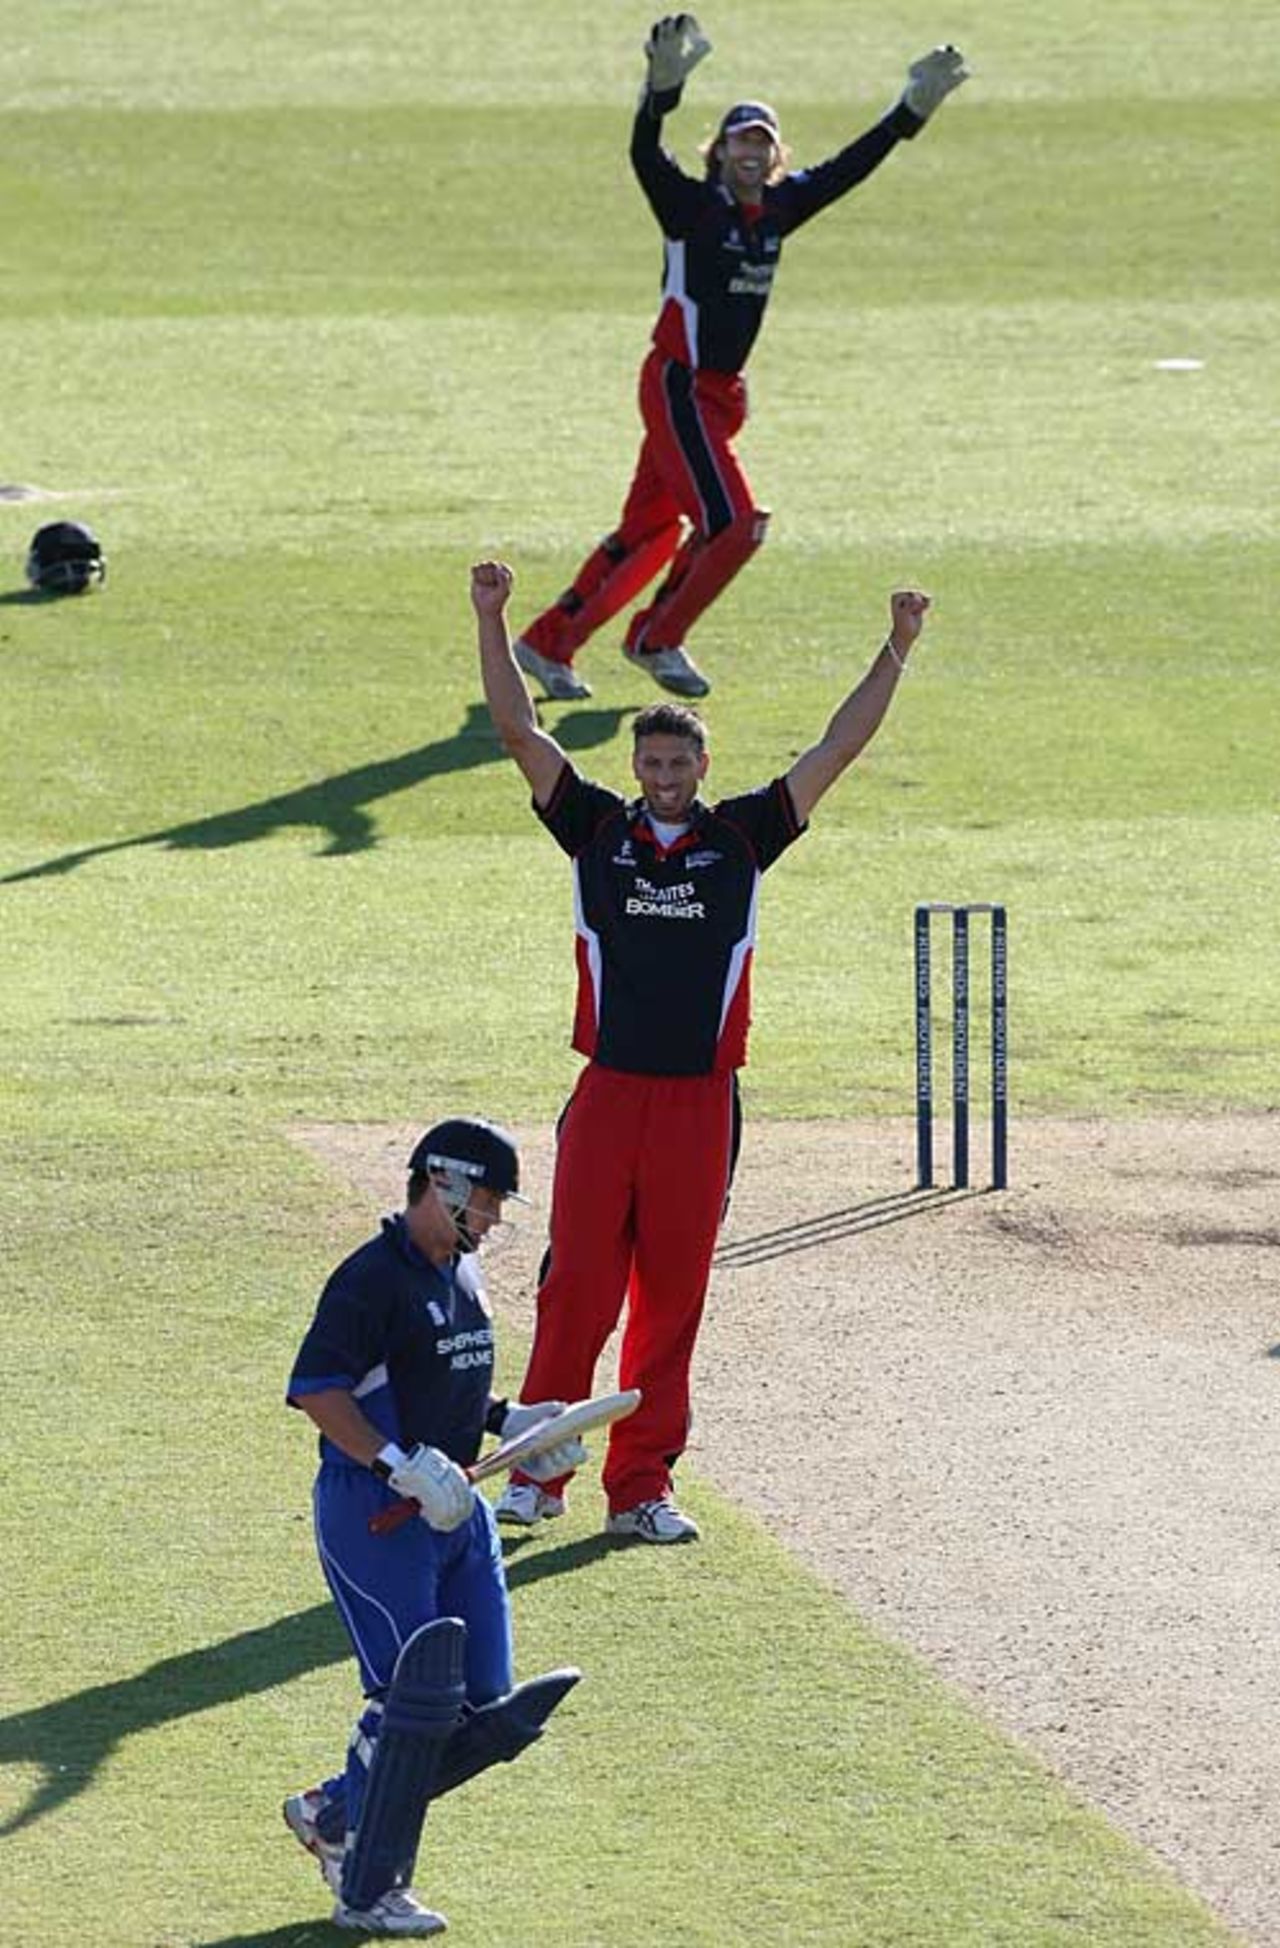 Sajid Mahmood removes Graham Napier to put Lancashire closer to victory, Lancashire v Essex, Friends Provident Trophy quarter-final, Old Trafford, May 23, 2009